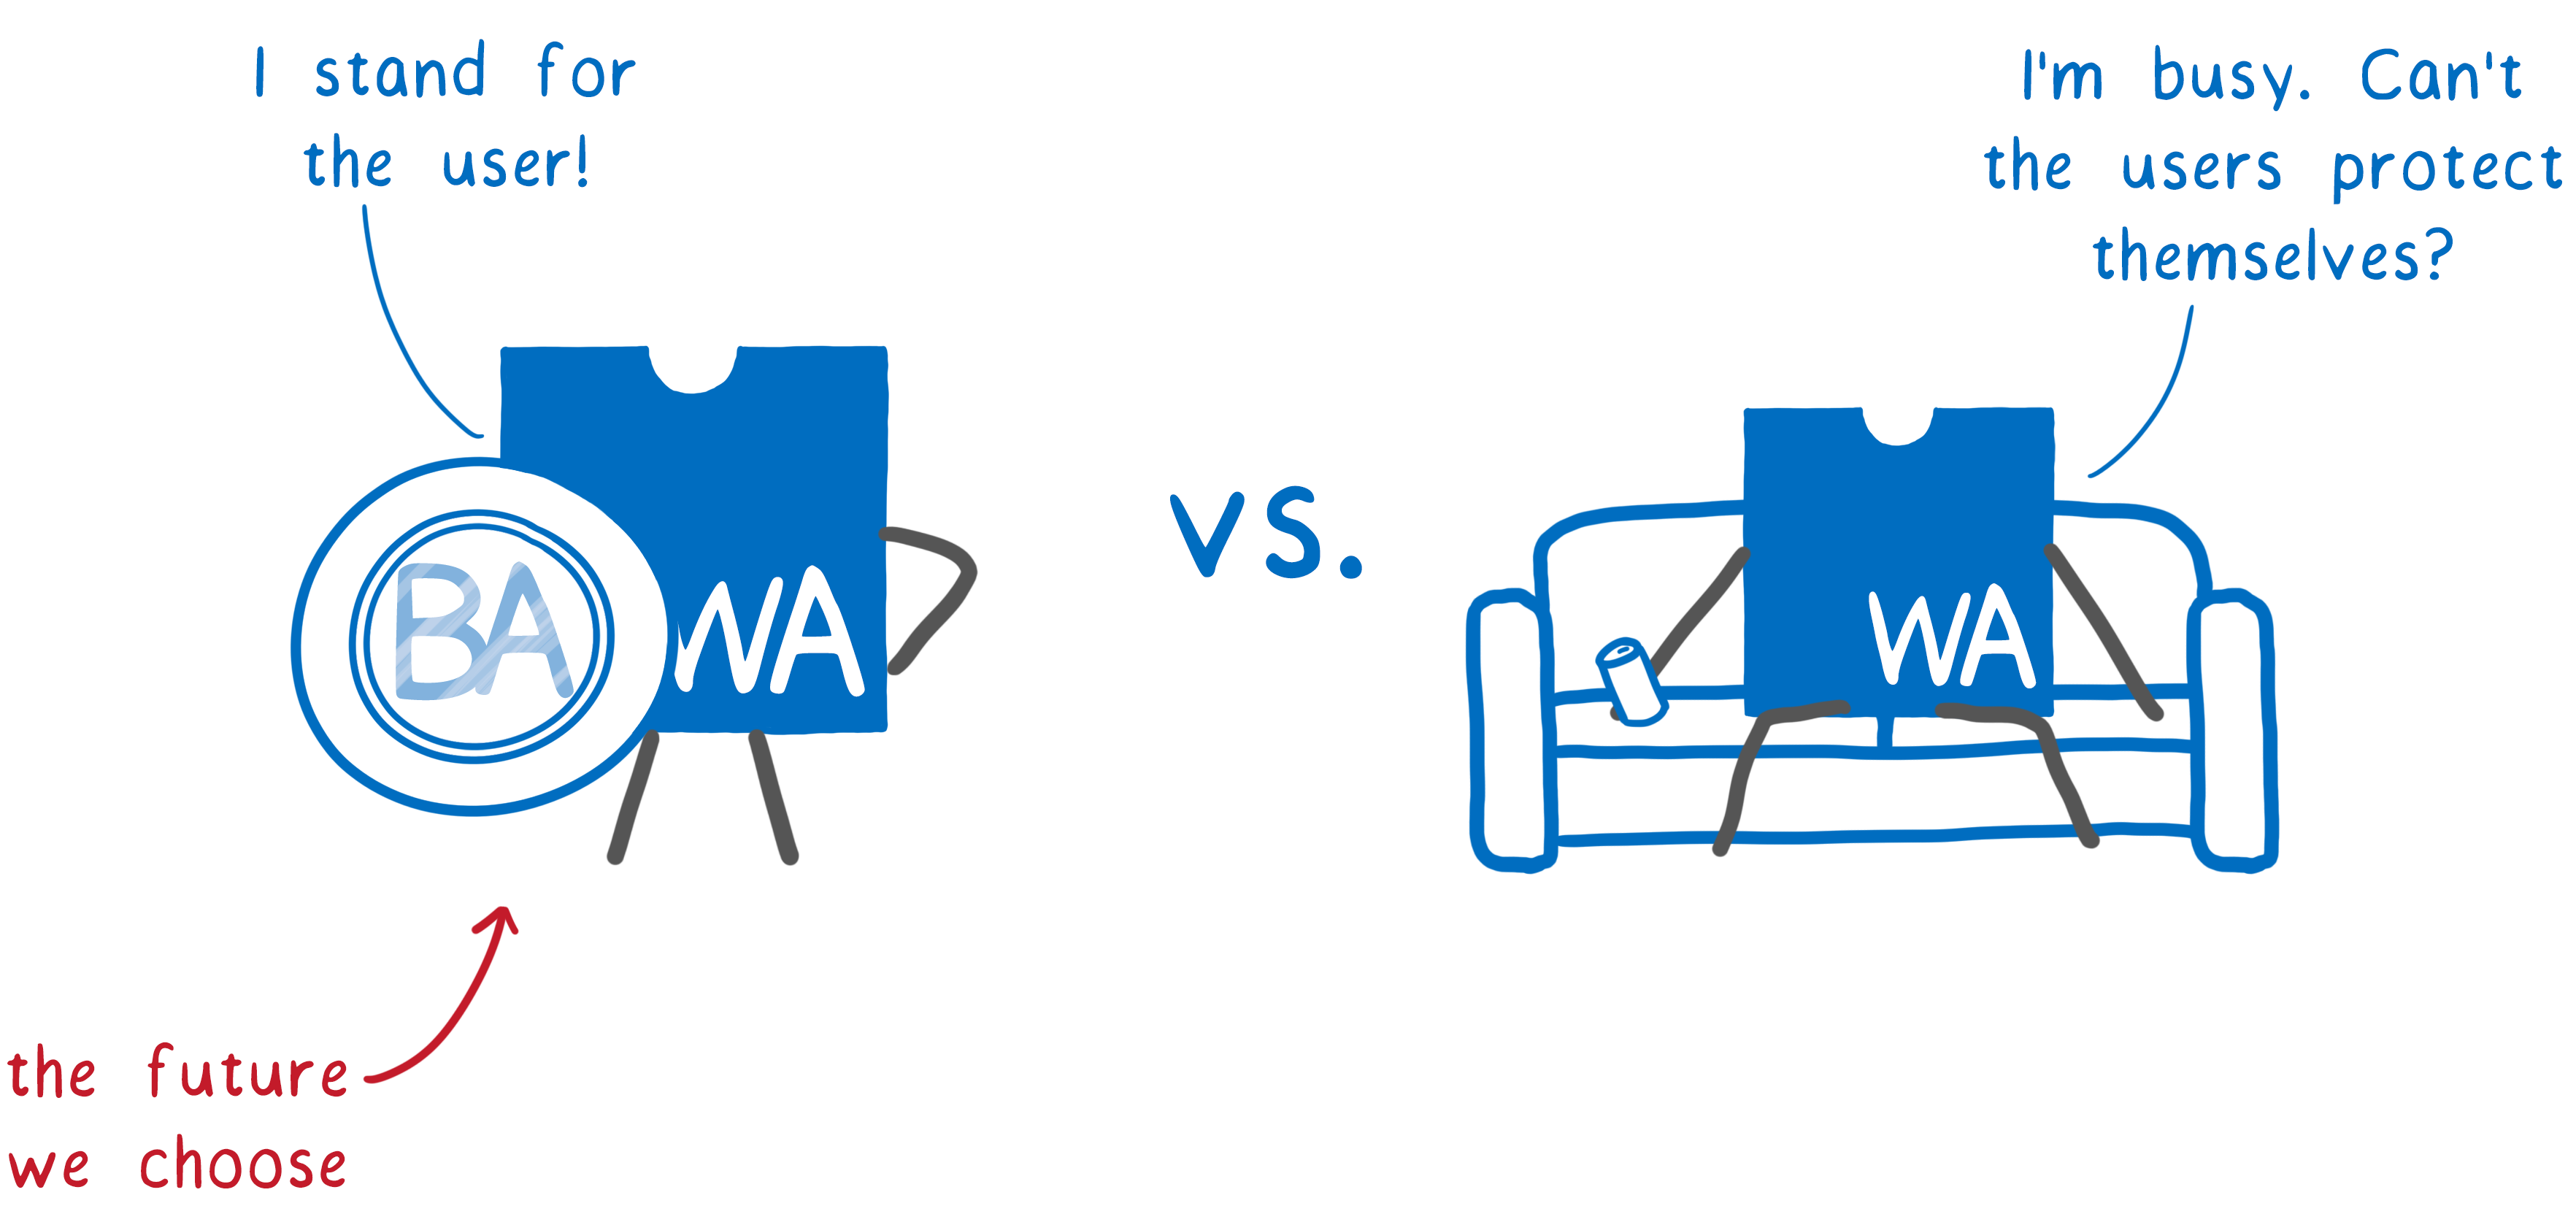 A personified WebAssembly logo holding a shield and saying 'I stand for the user!' vs a WebAssembly logo sitting on the couch saying 'I am busy. Cant the users protect themselves?'